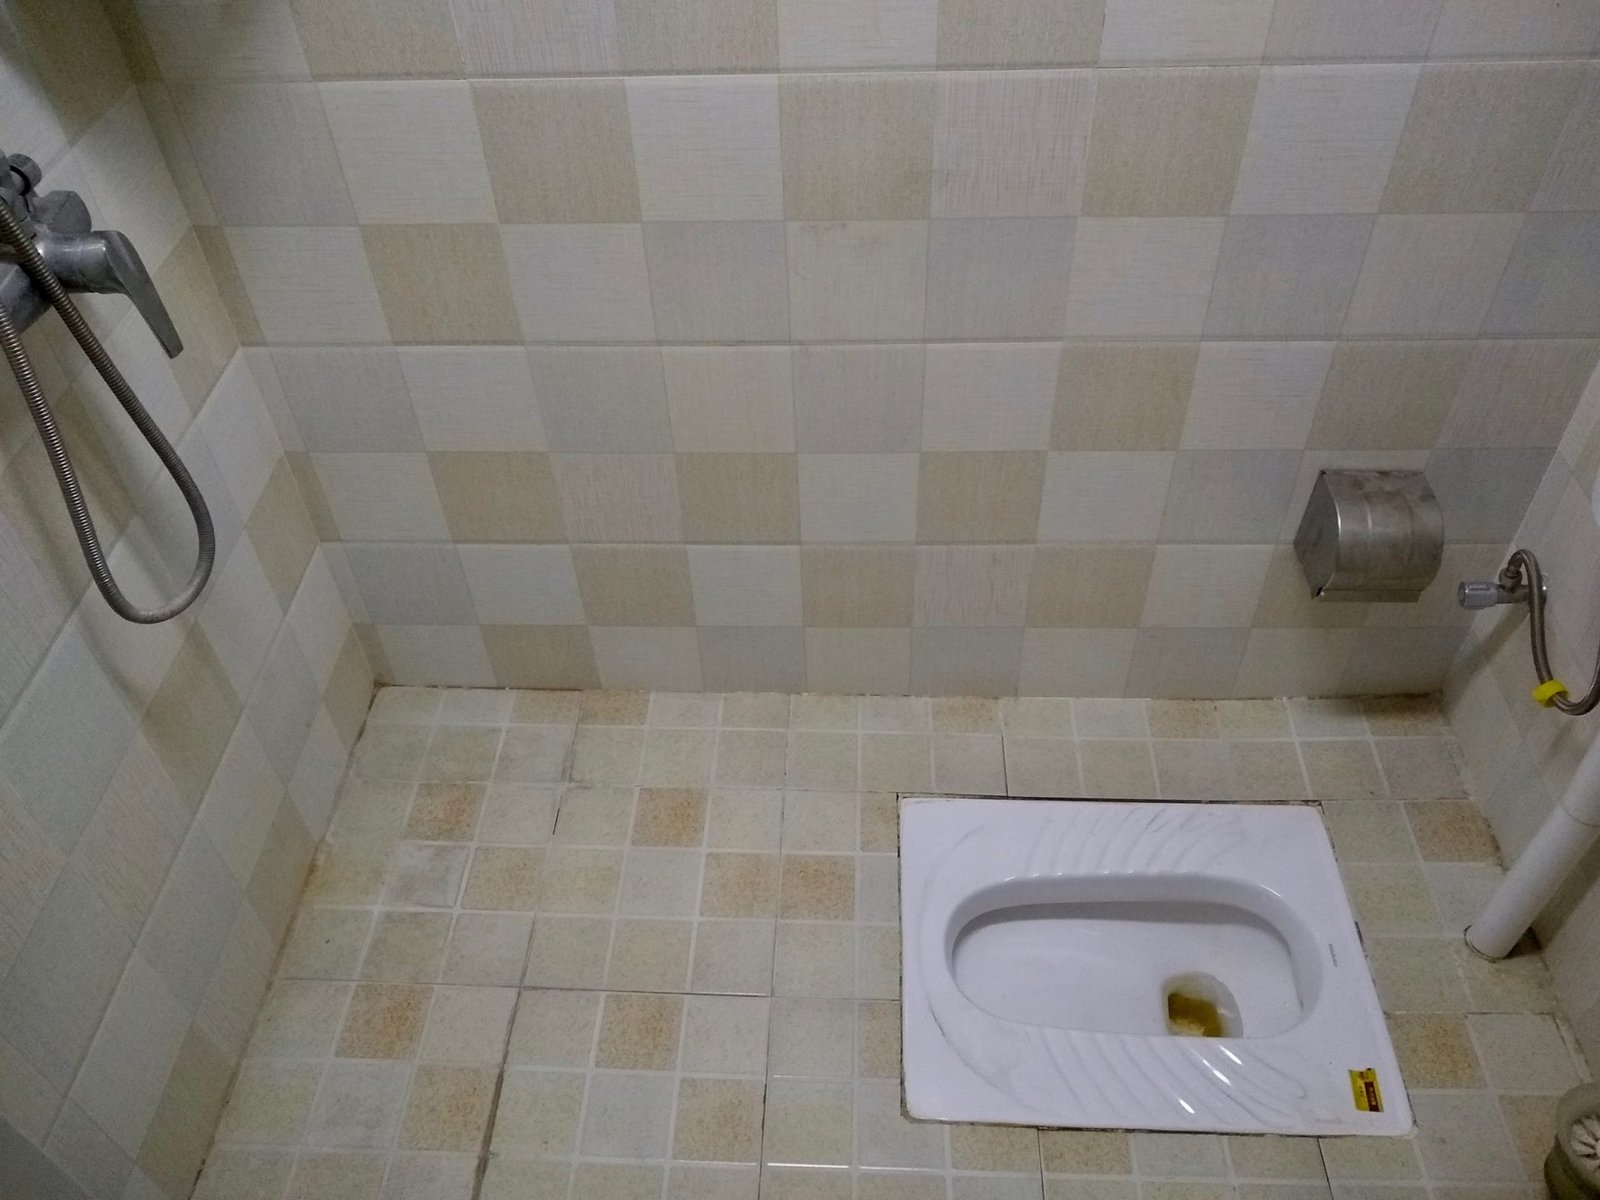 Bathrooms in much of the Asian world are set up as wet rooms, with a shower and squat toilet together